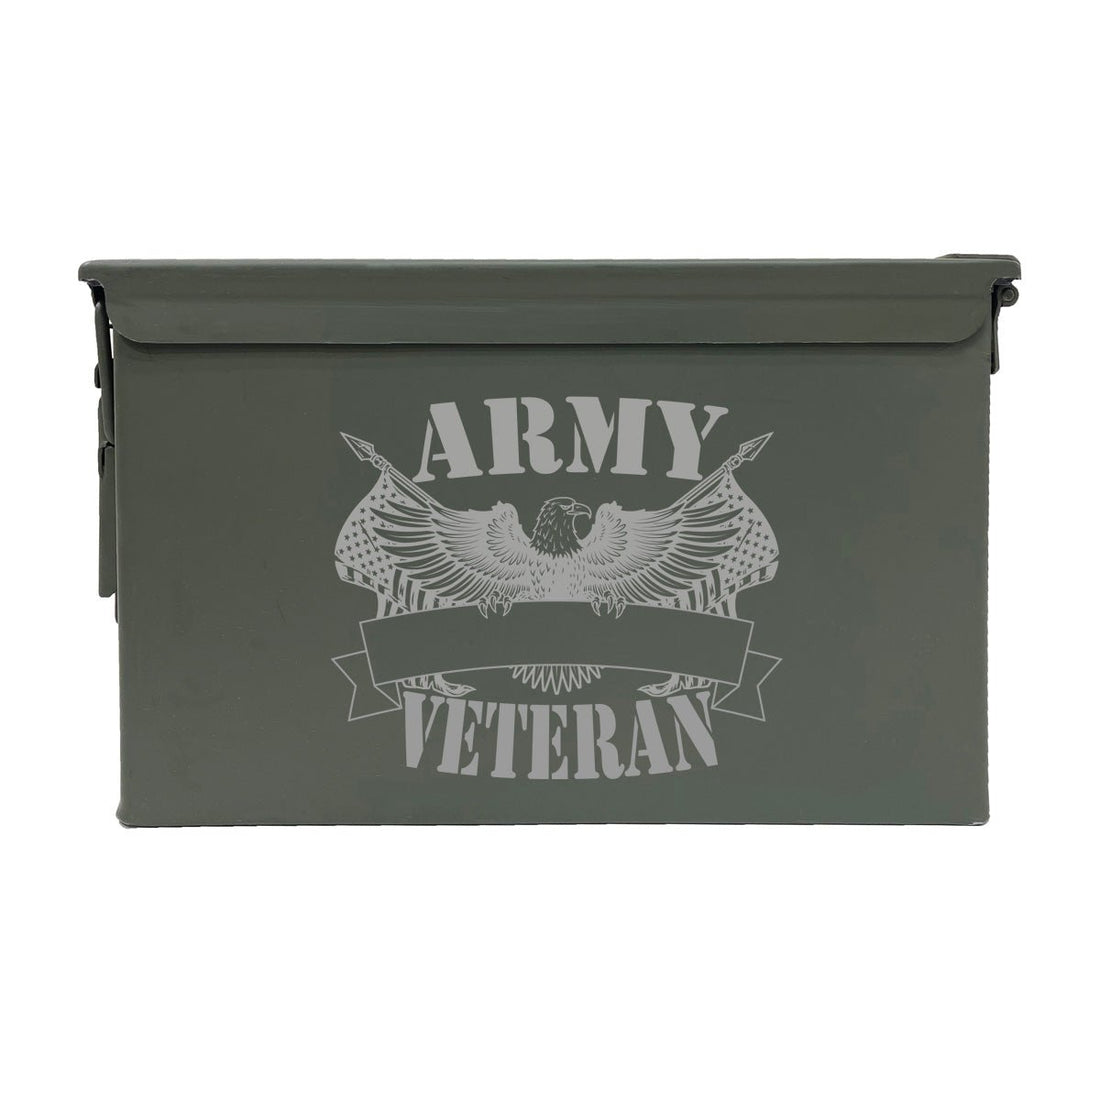 Laser Engraved - ARMY - Veteran Used Grade 1 Ammo Cans - 30 Cal, 50 Cal or Fat 50 - ATOM Promotions